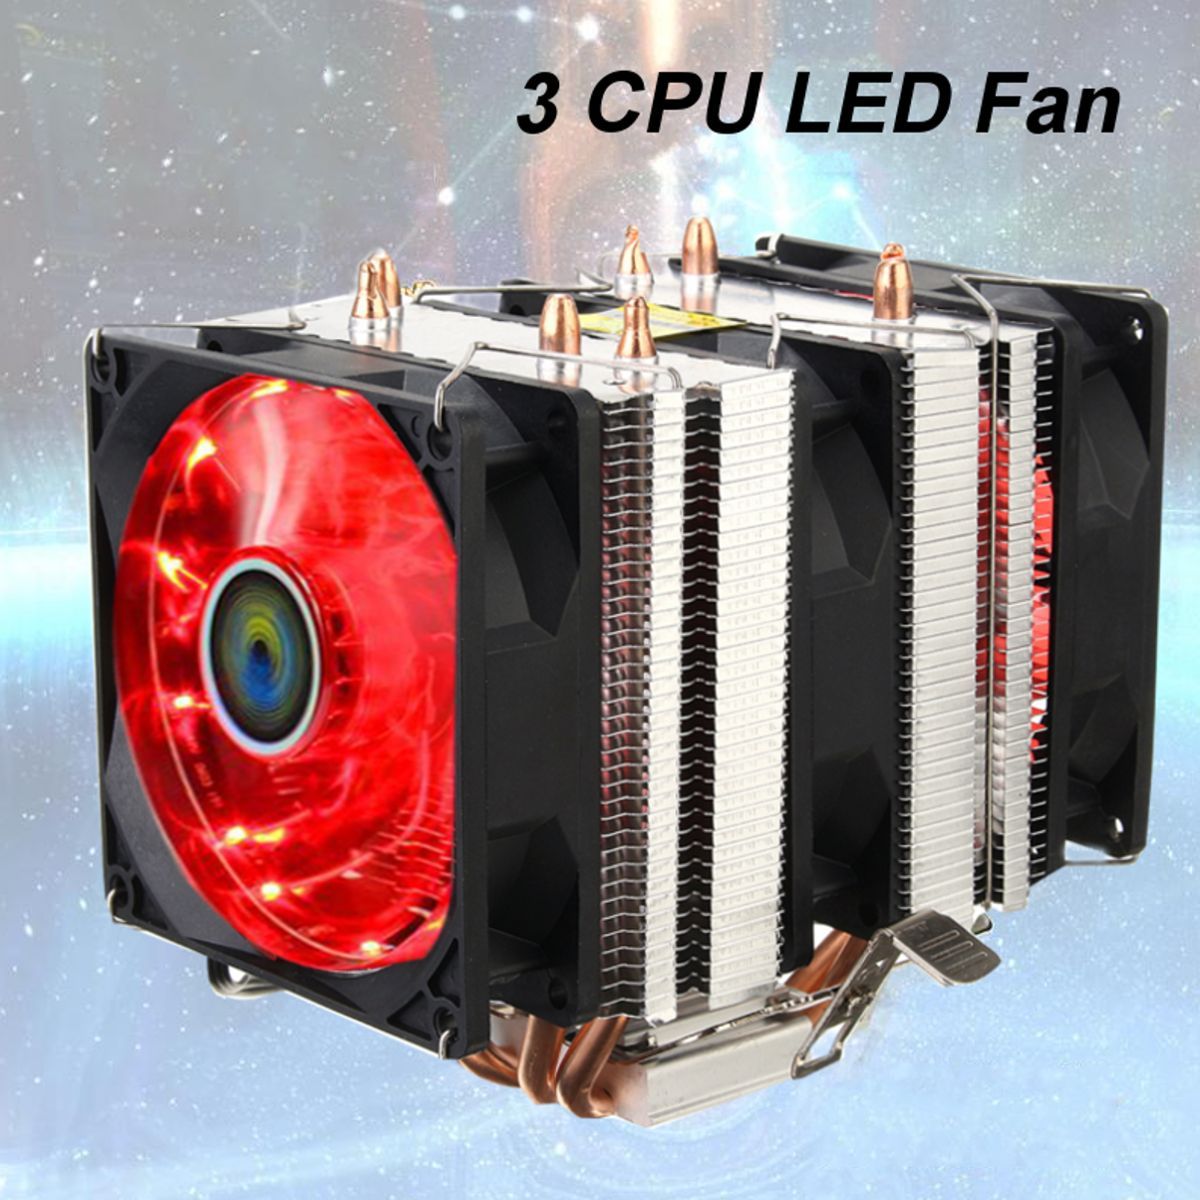 4-Heat-Pipes-Red-Led-3-CPU-Cooling-Cooler-Fan-Heat-Sink-for-AMD-AM22-AM3-Intel-LGA-1156-1190677